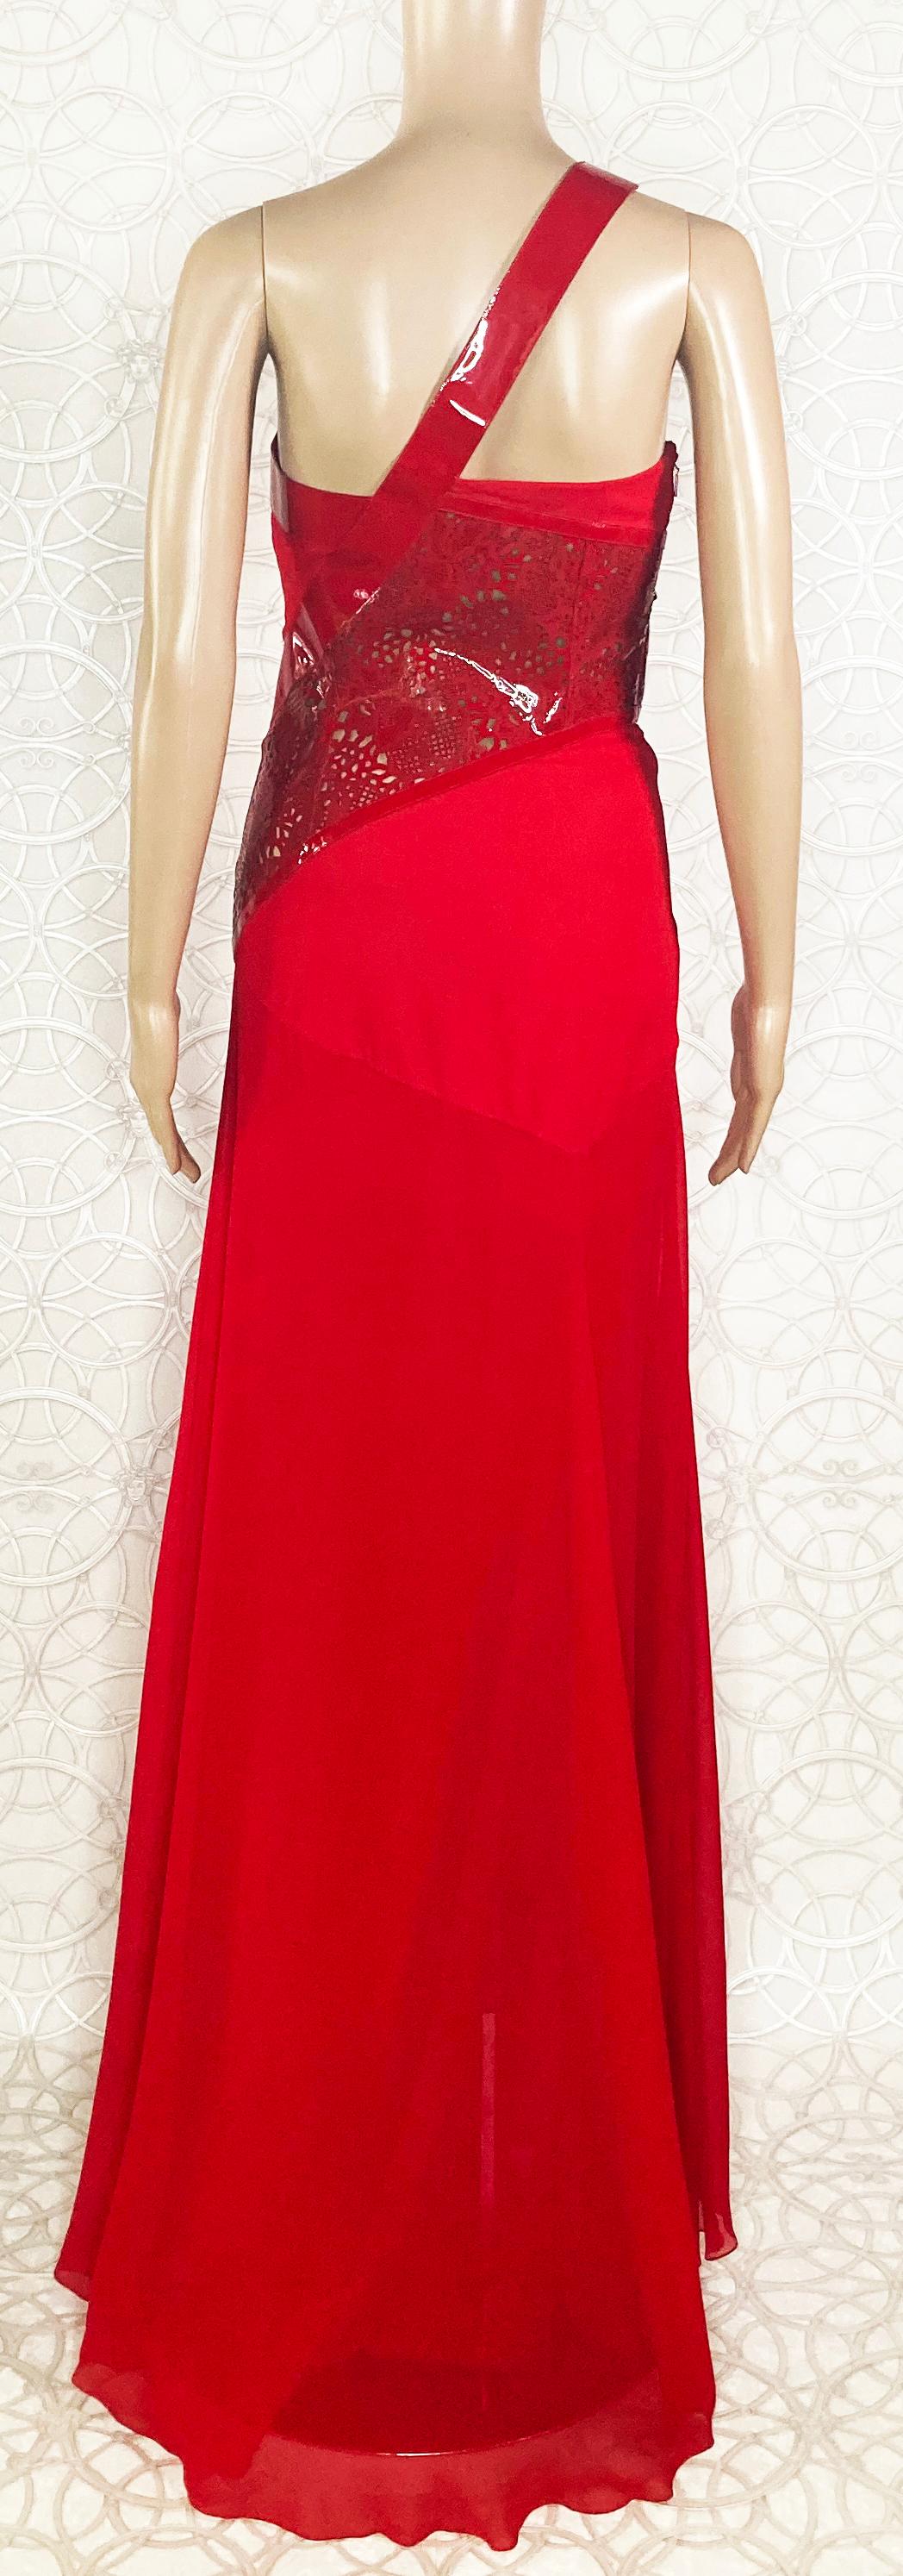 VERSACE RED SILK EVENING LONG GOWN DRESS w/PATENT LEATHER INSERTS 38 -2 For Sale 6